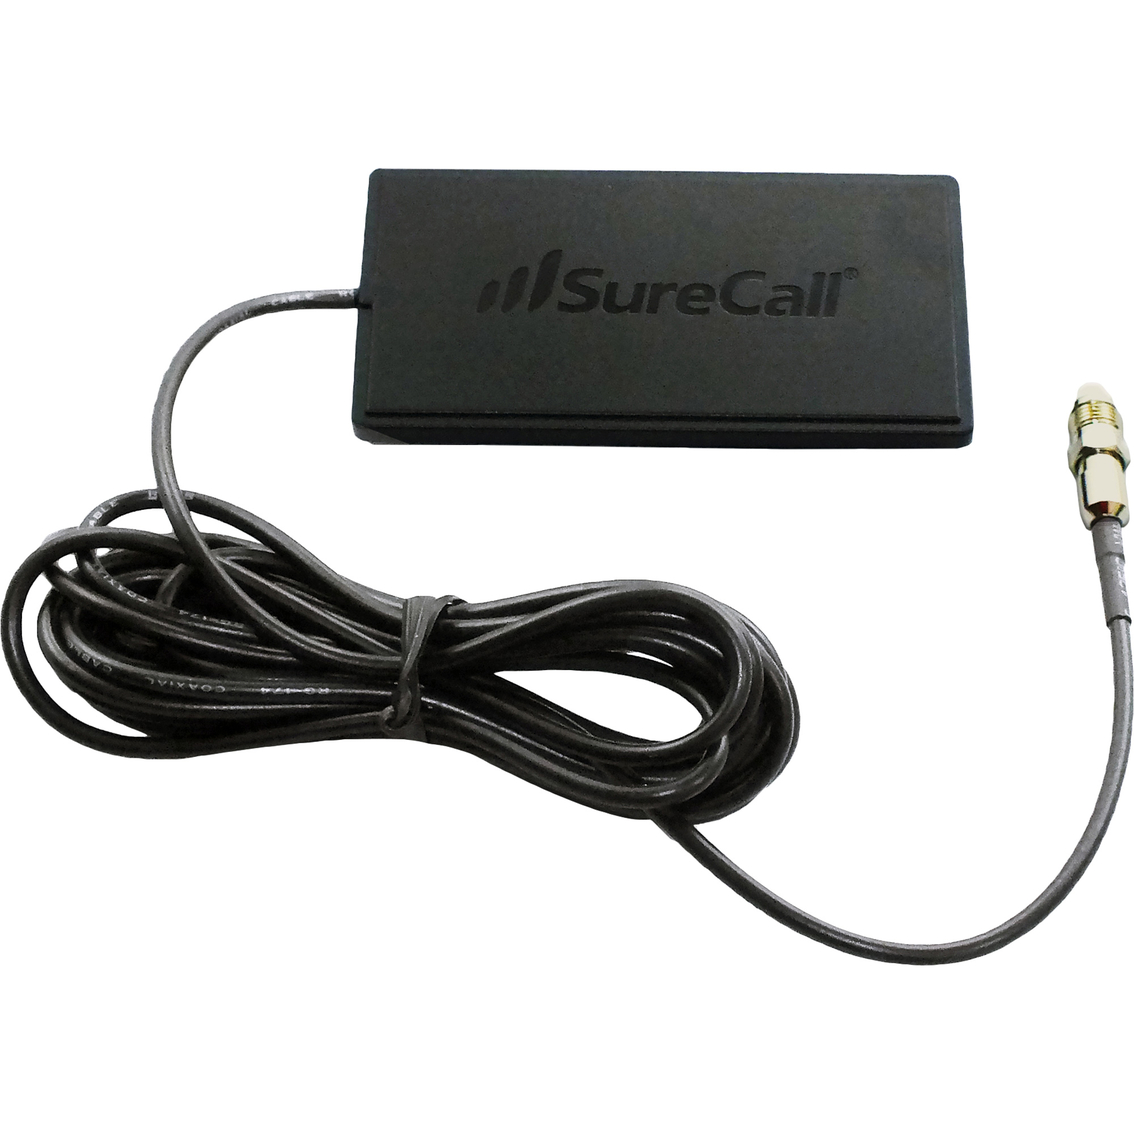 Surecall Fusion2go Max In-vehicle Cell Phone Signal Booster - Image 8 of 9